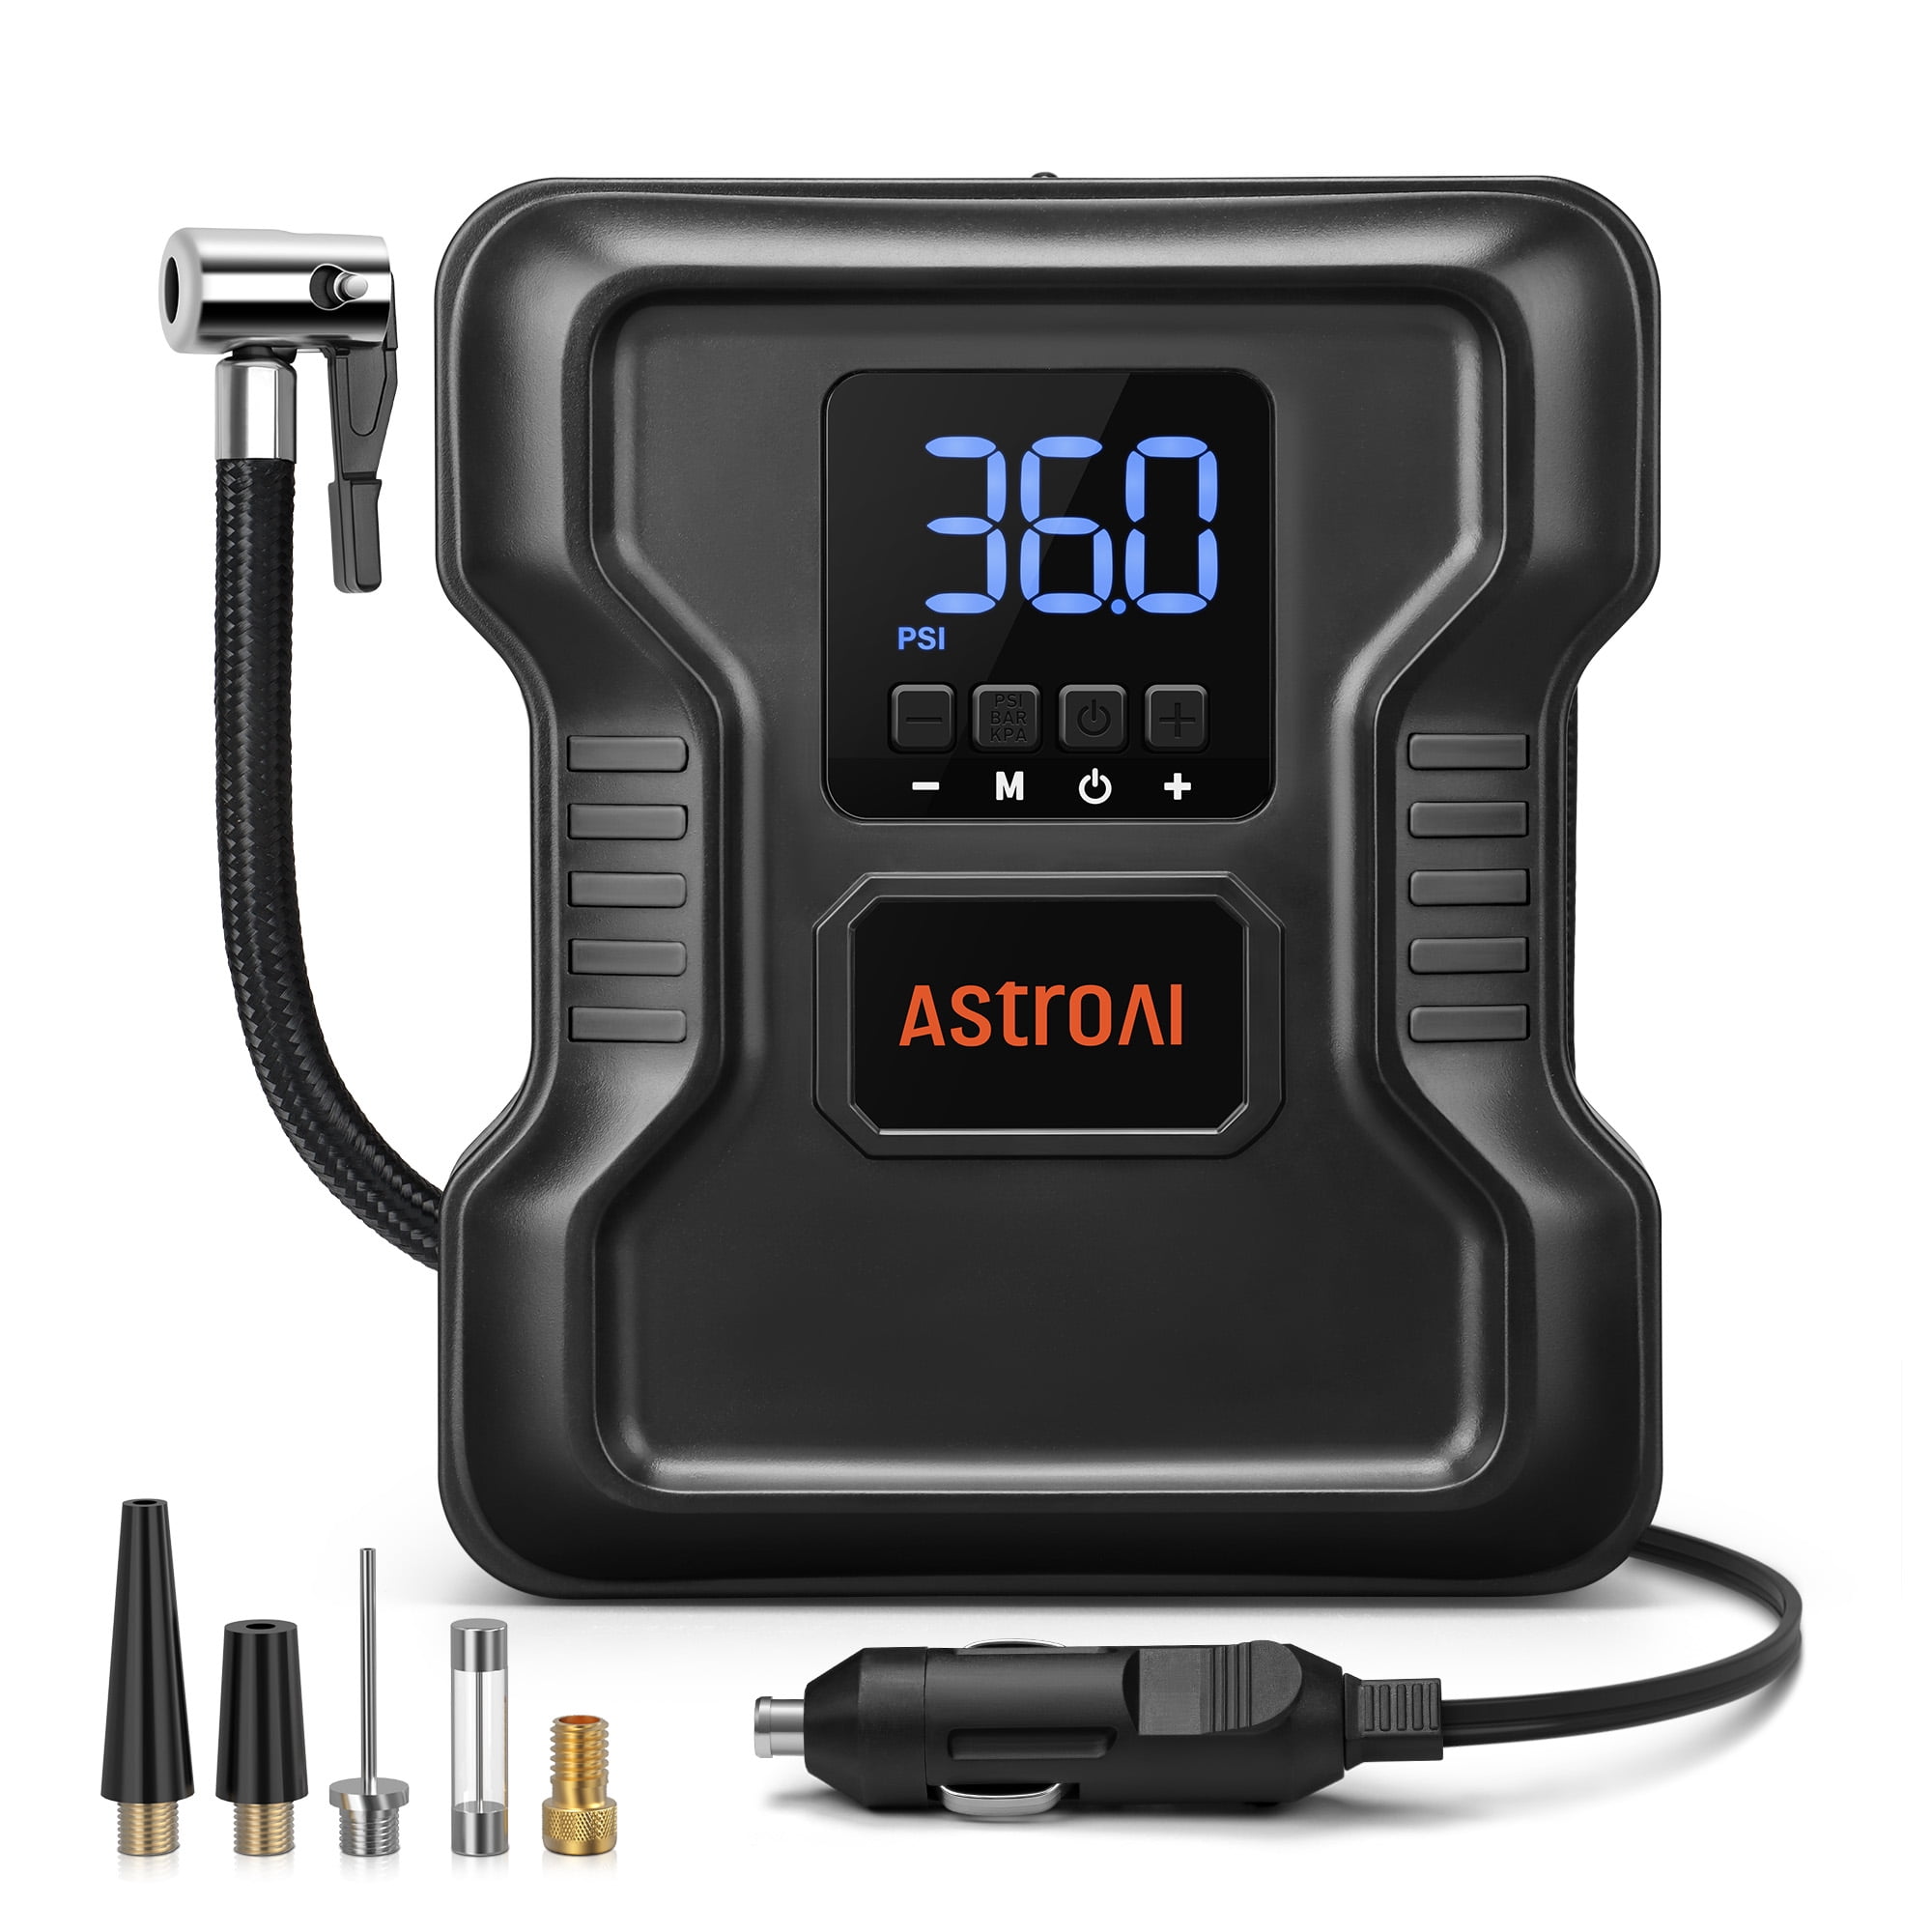 AstroAI Portable Tire Inflators As Low As $14.99 Today Only (reg